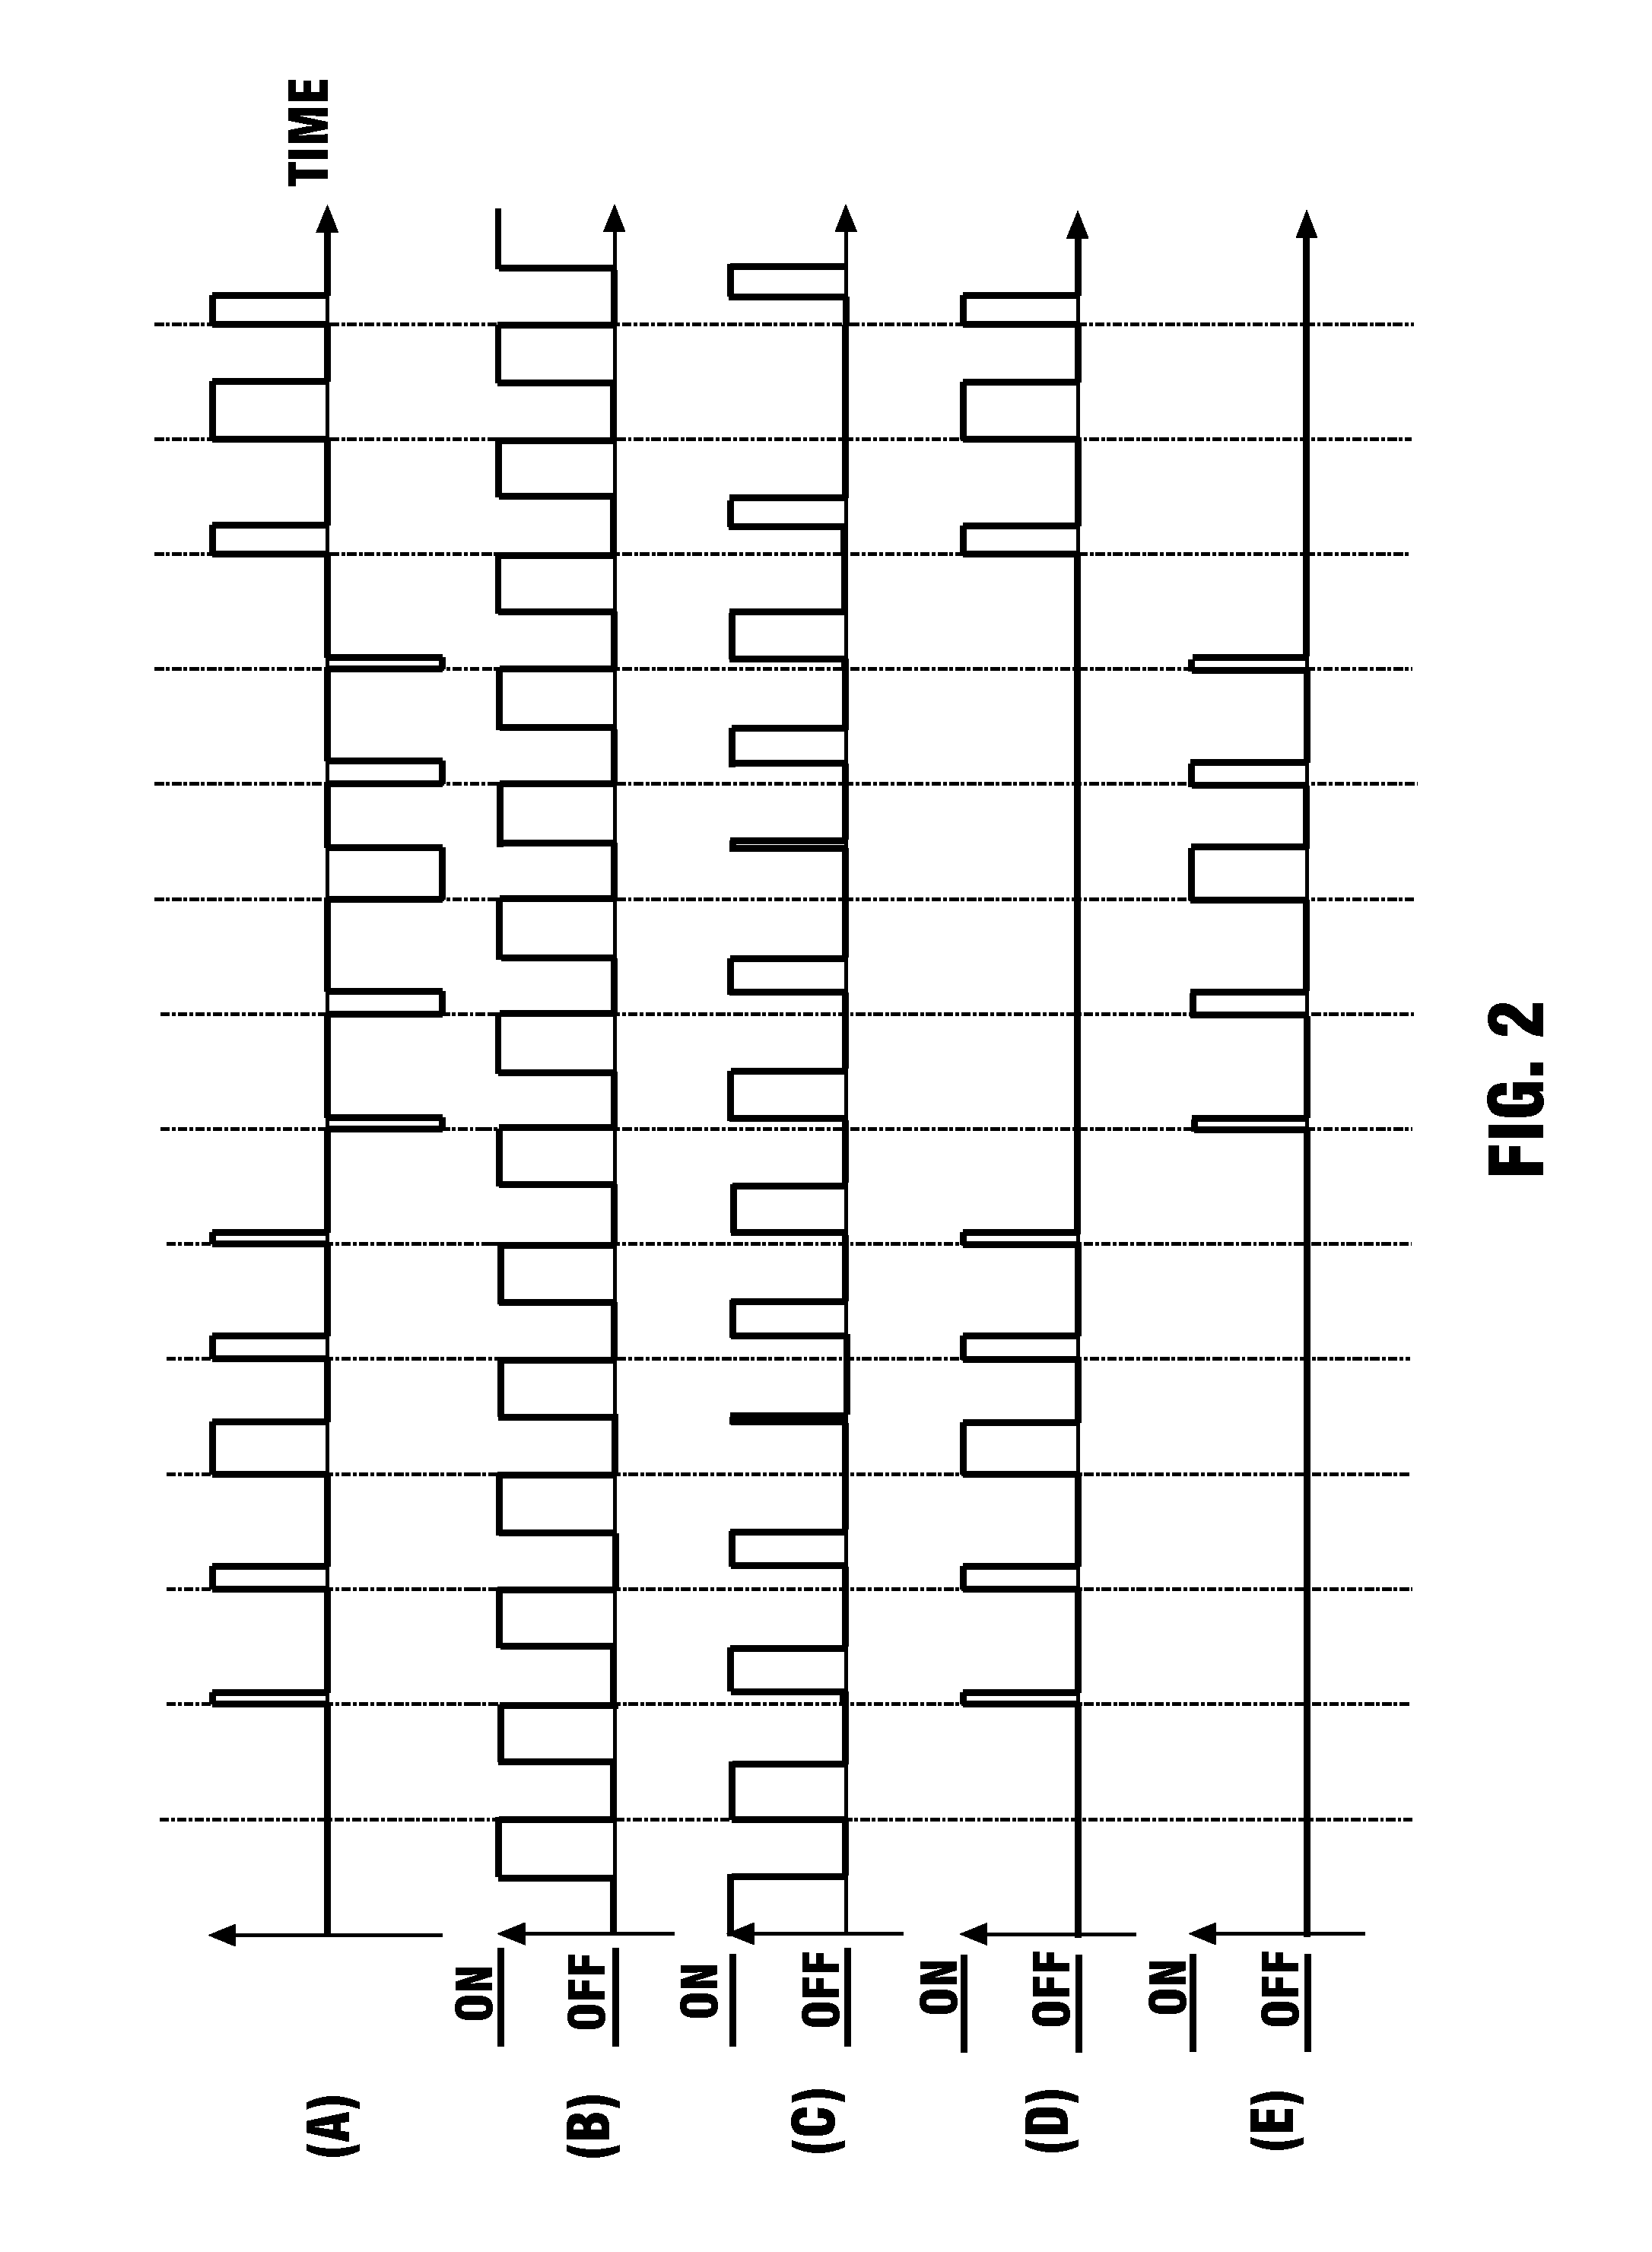 Switching amplifier with pulsed current supply